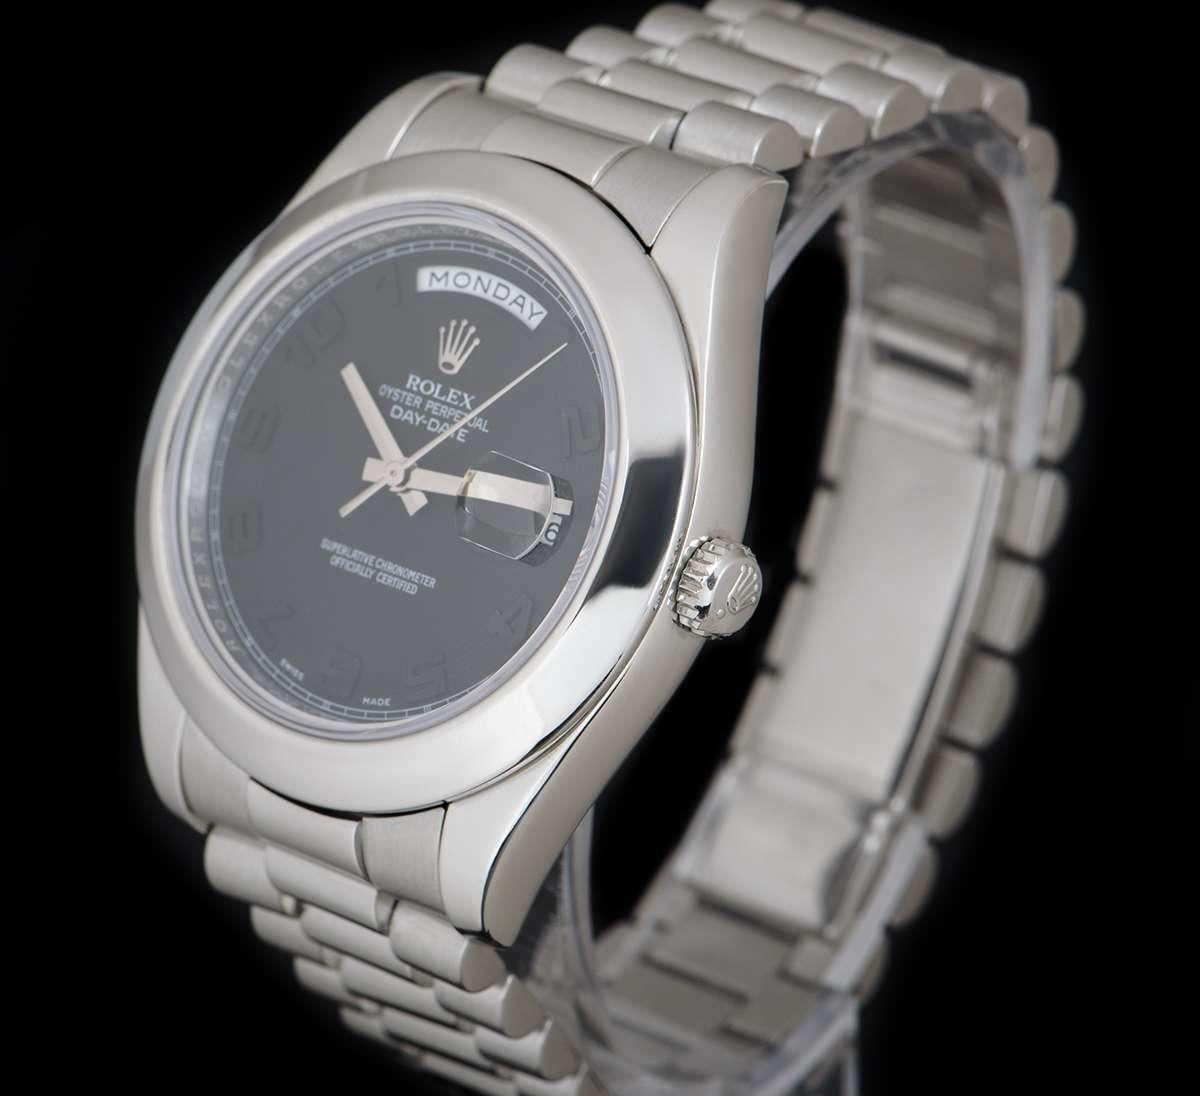 A 2008 41mm Platinum Oyster Perpetual Day-Date II Gents Wristwatch, black dial with applied arabic numbers, day aperture at 12 0'clock, date aperture at 3 0'clock, a fixed platinum smooth bezel, a platinum president bracelet with a concealed